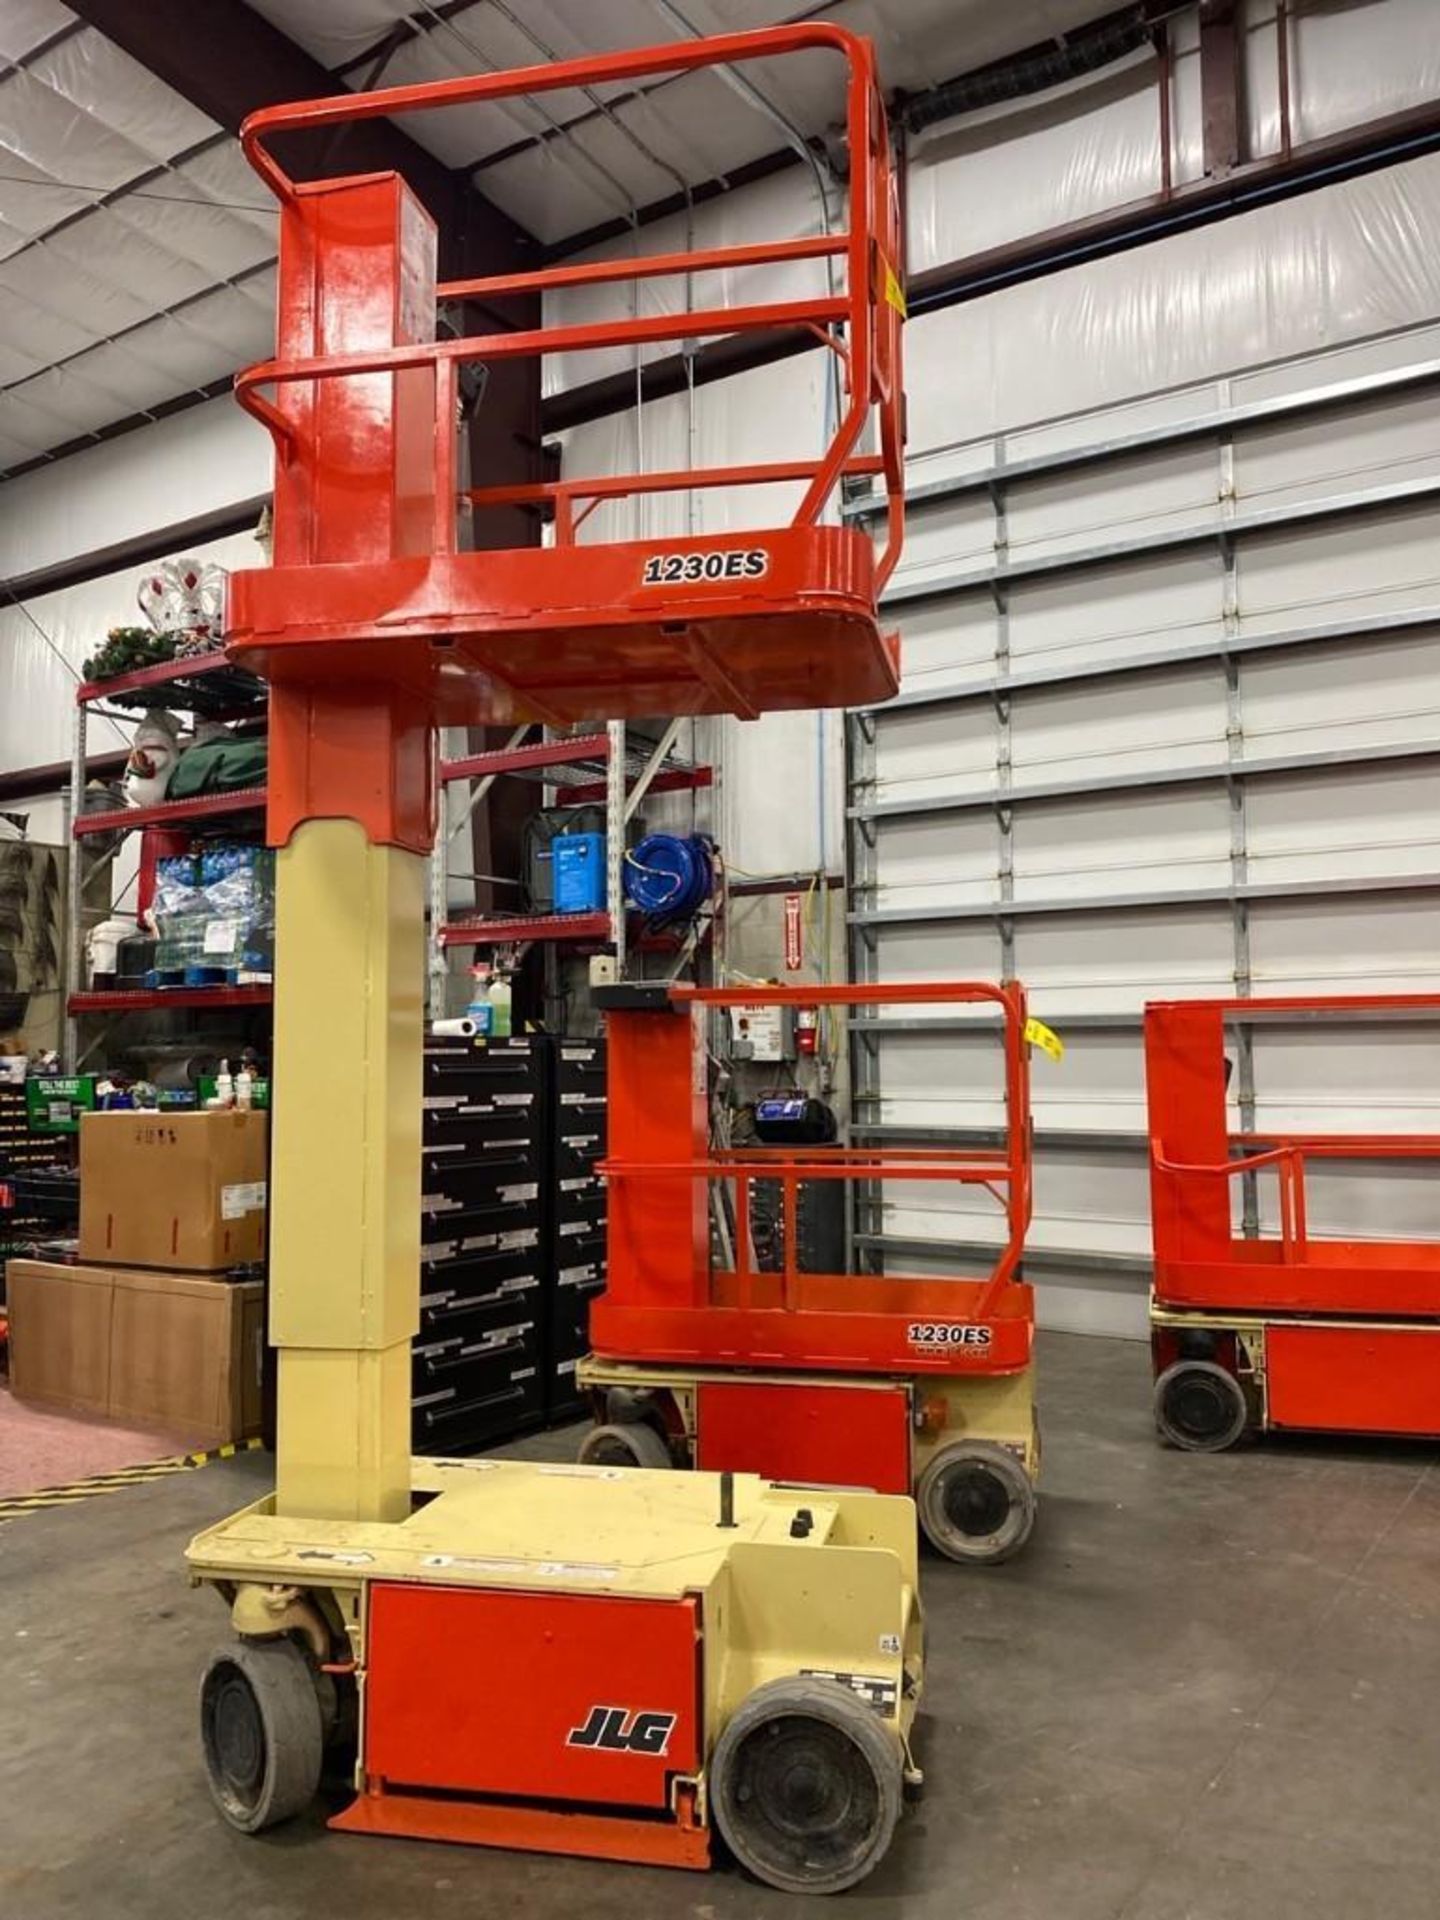 JLG 1230 ES ELECTRIC MAN LIFT, SELF PROPELLED, BUILT IN BATTERY CHARGER, 12' PLATFORM HEIGHT, APPROX - Image 6 of 7